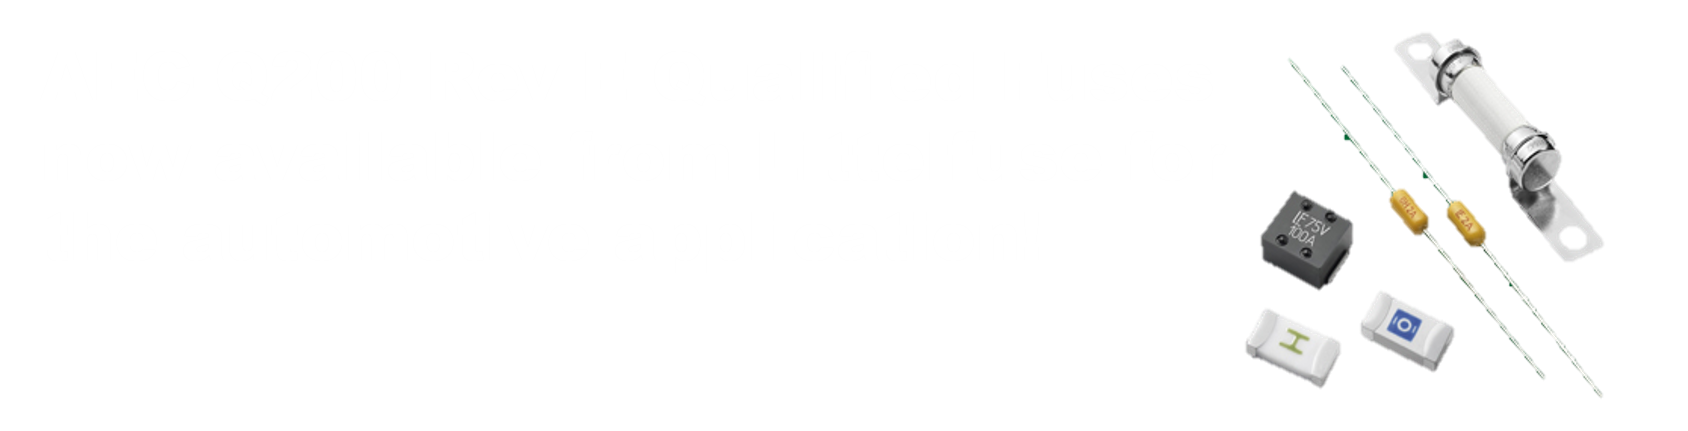 Littlefuse Newly Released Driver for SiCMOSEFT & IGBTApplication